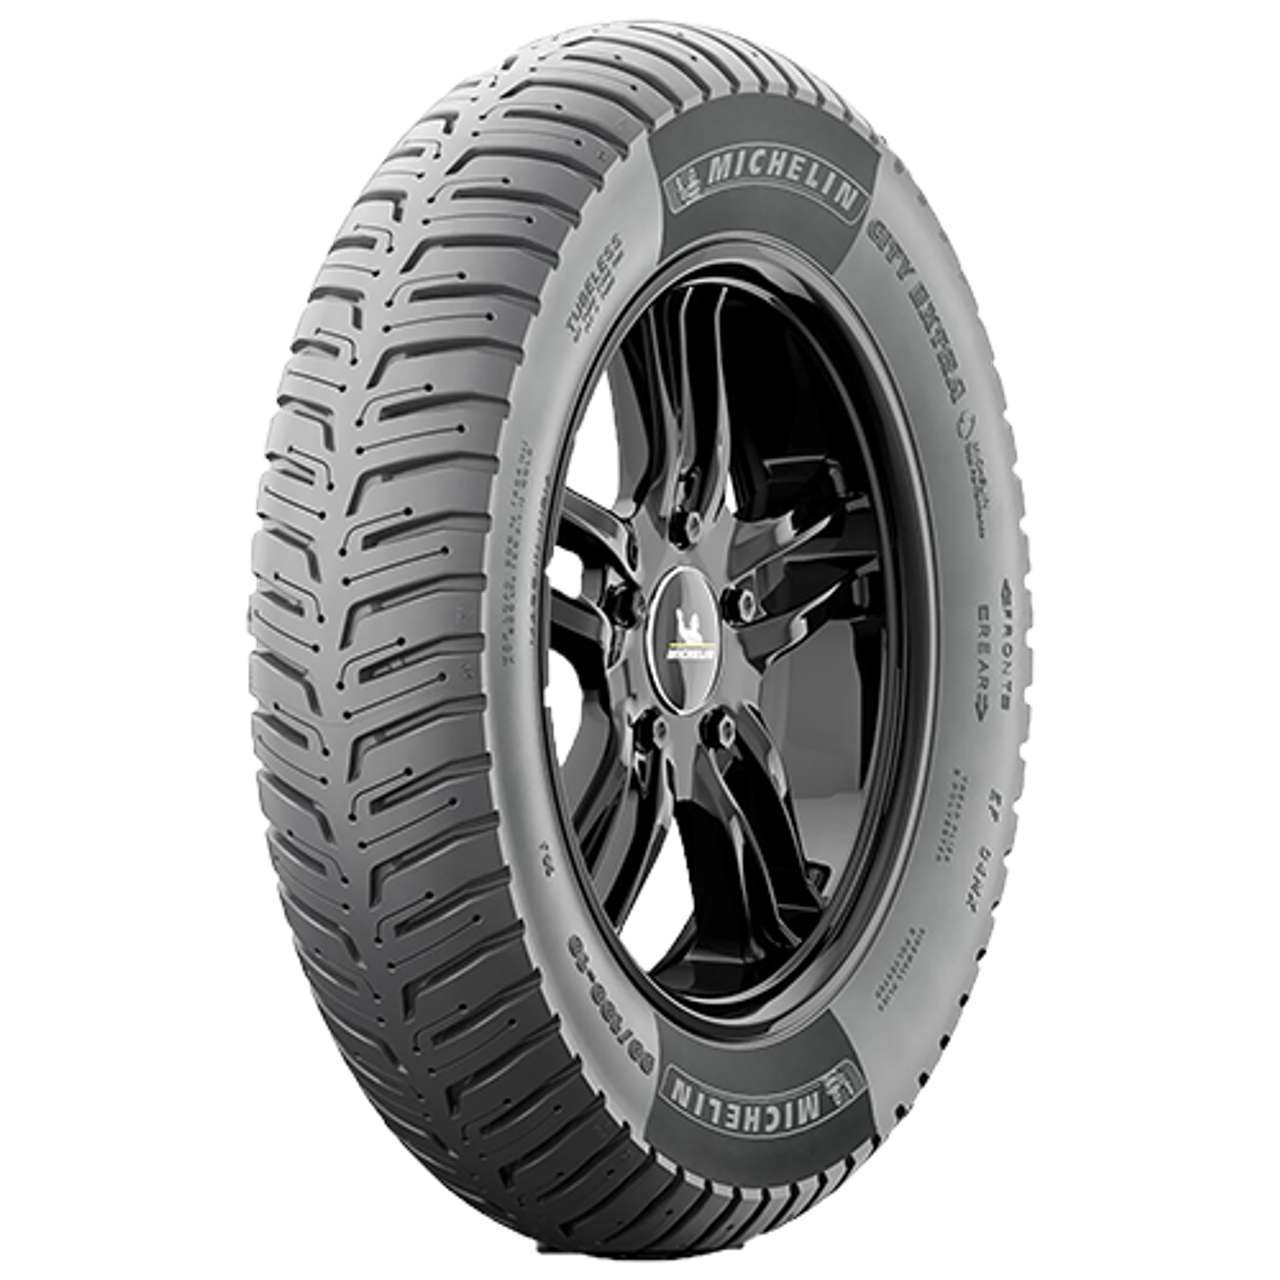 MICHELIN CITY EXTRA 100/80 - 14 M/C TL 48S FRONT/REAR